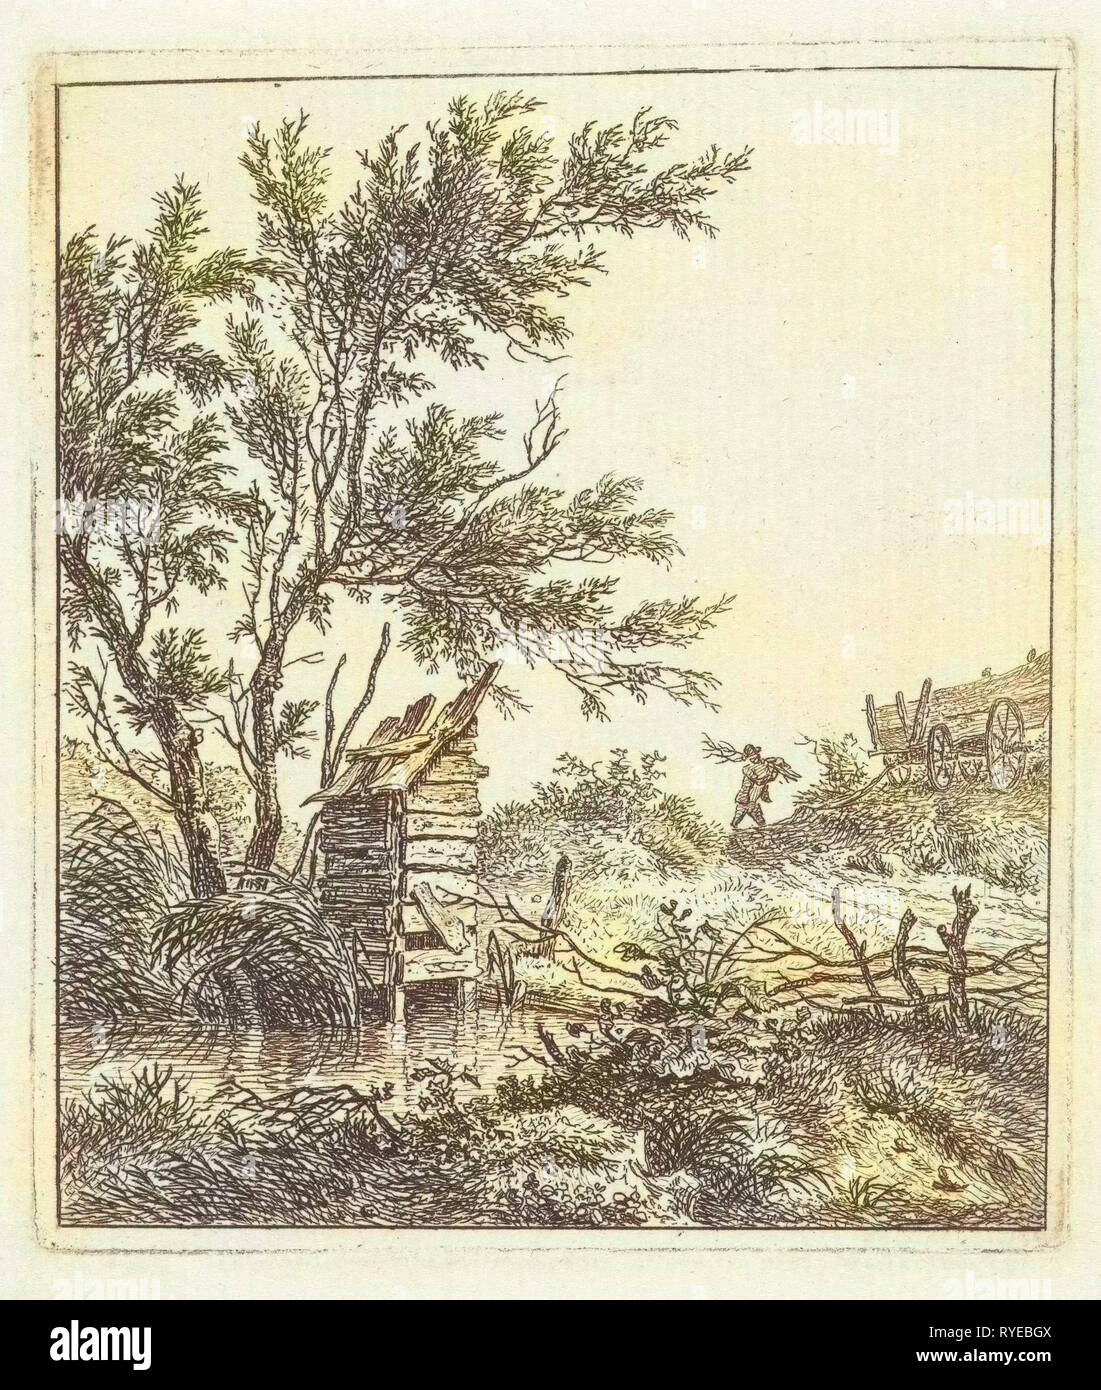 A landscape with a wooden building under a tree by the water, in the background brings a man dead wood to a cart, print maker: Hermanus Fock, Dating 1781 - 1822 Stock Photo